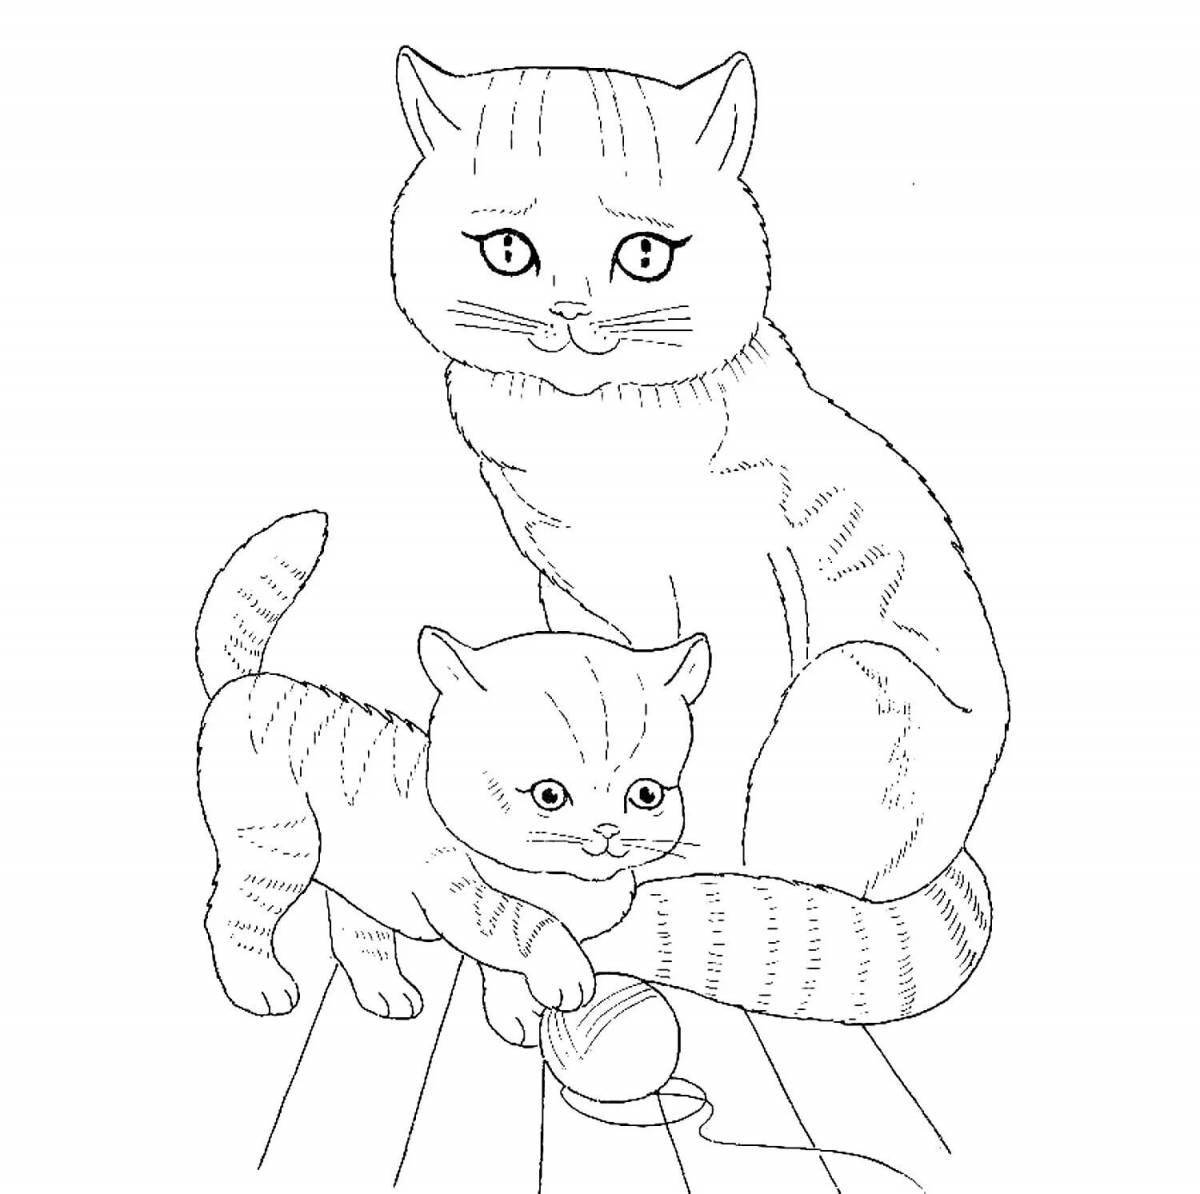 Kitty humorous coloring book for children 6-7 years old